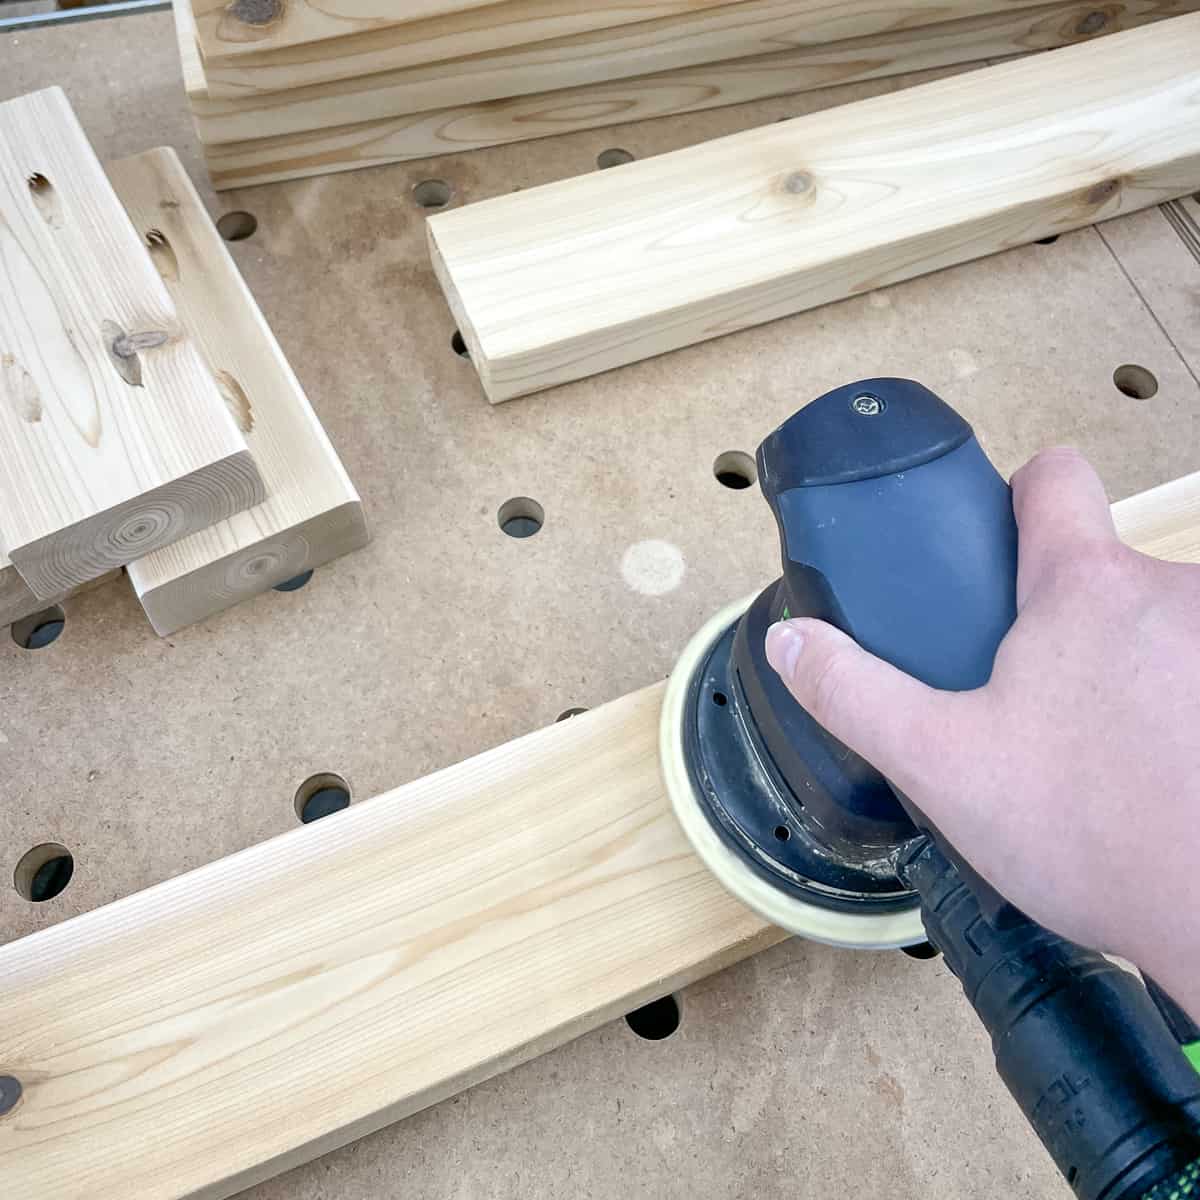 sanding cut pieces before assembling grill station